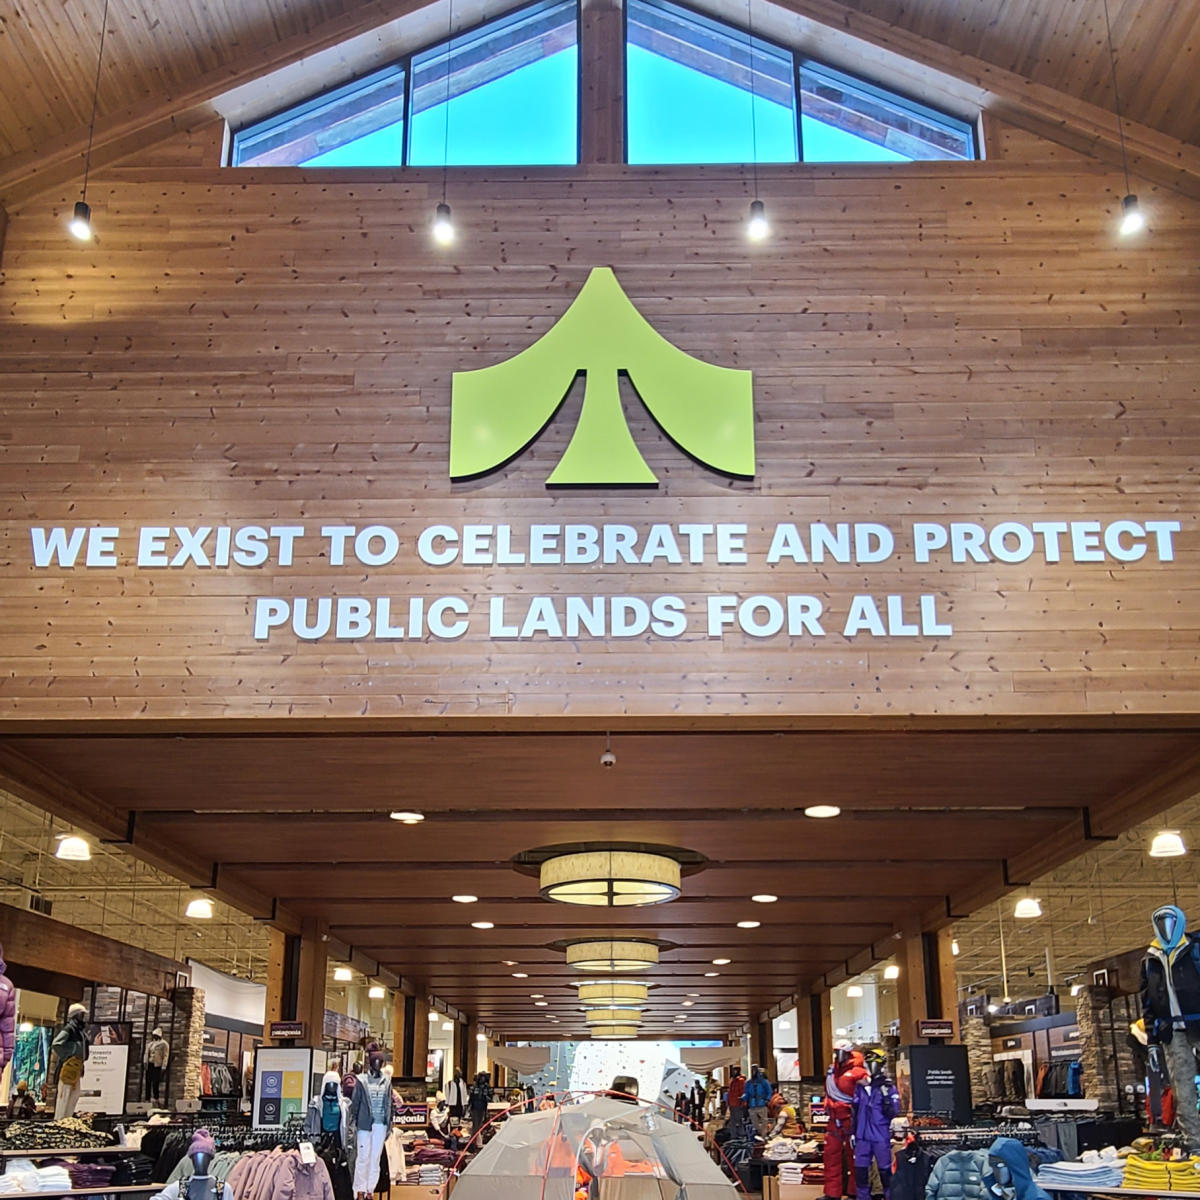 Public Lands Motto: We exist to celebrate and protect public lands for all